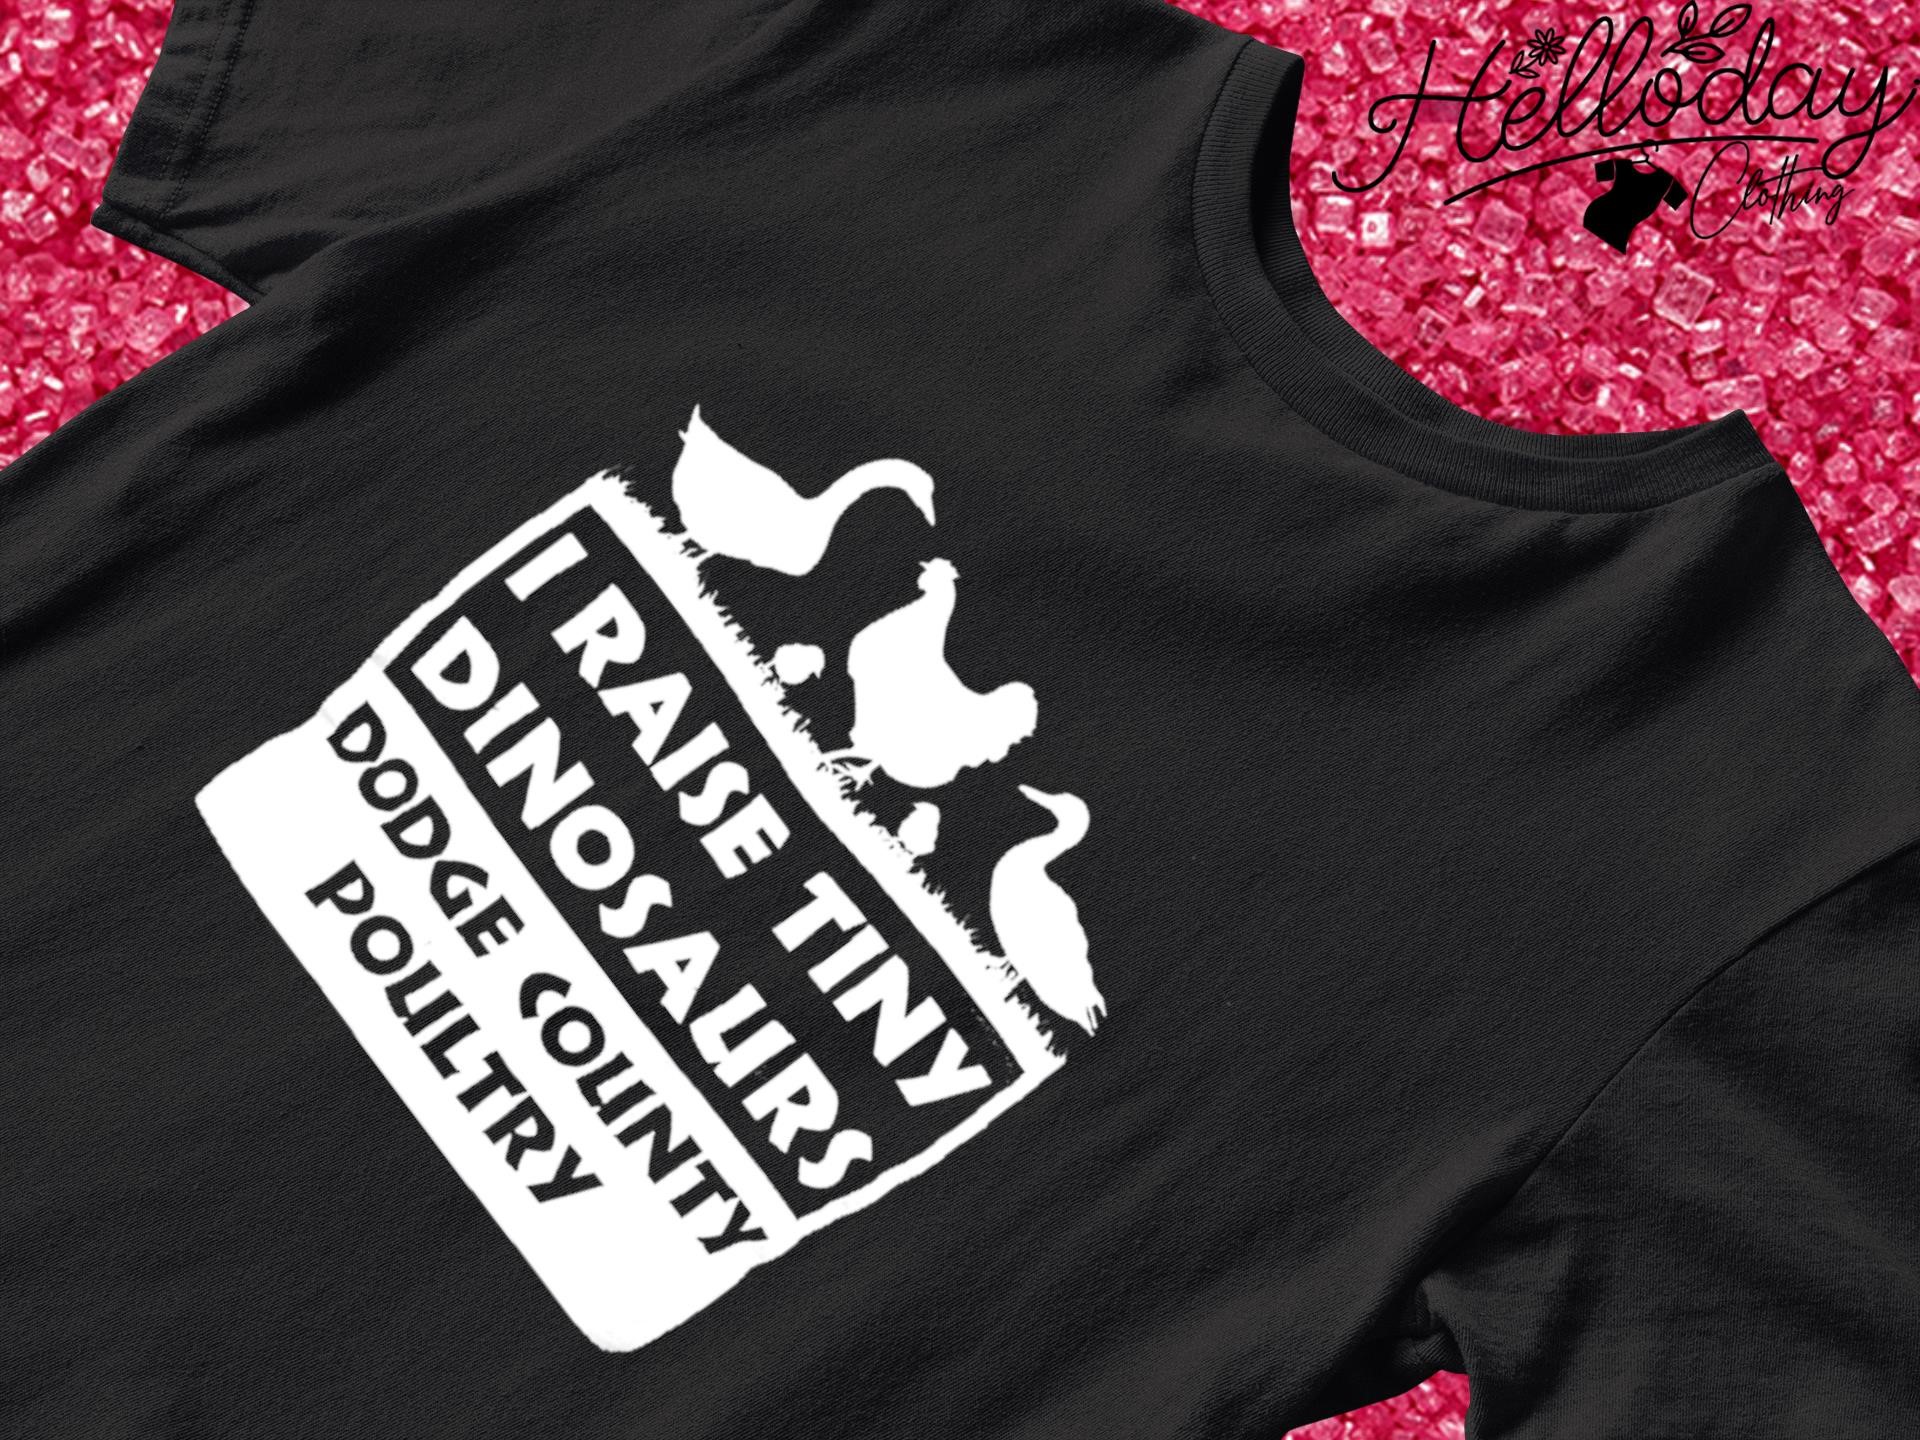 I raise tiny Dinosaurs dodge country poultry shirt